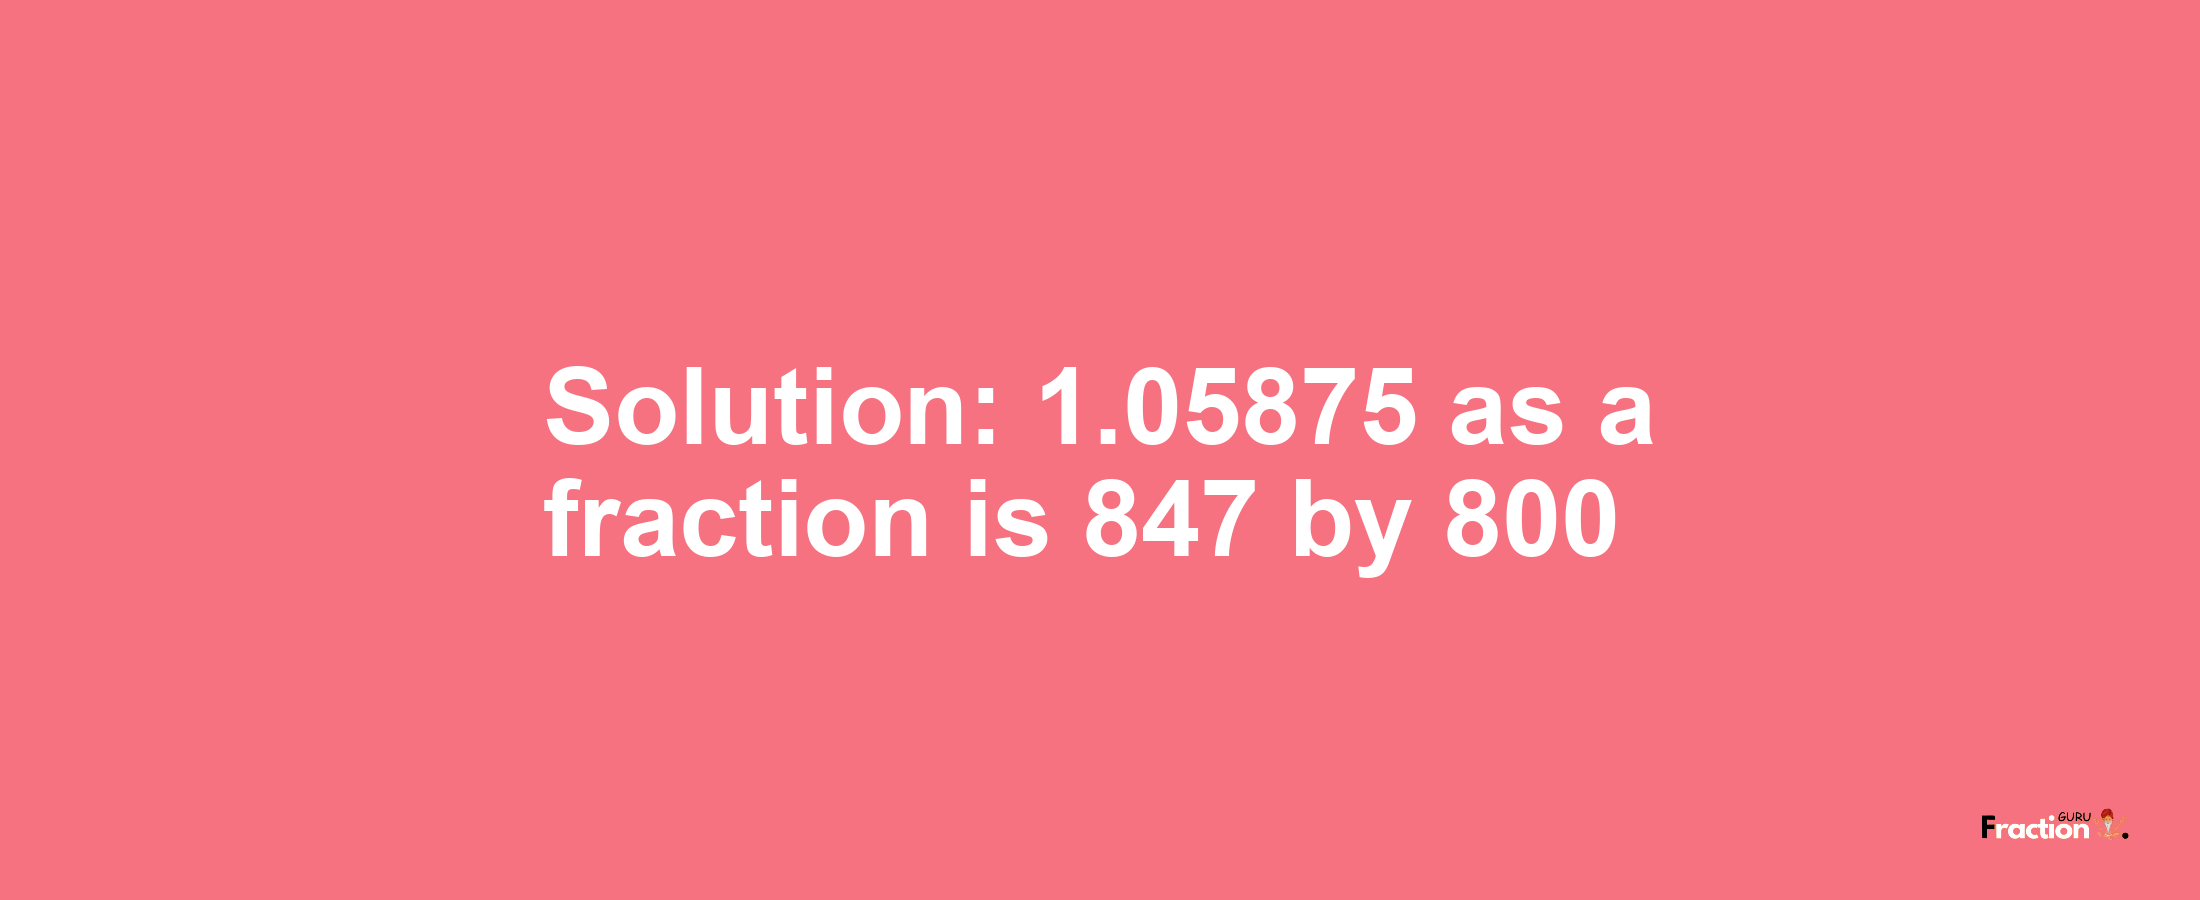 Solution:1.05875 as a fraction is 847/800